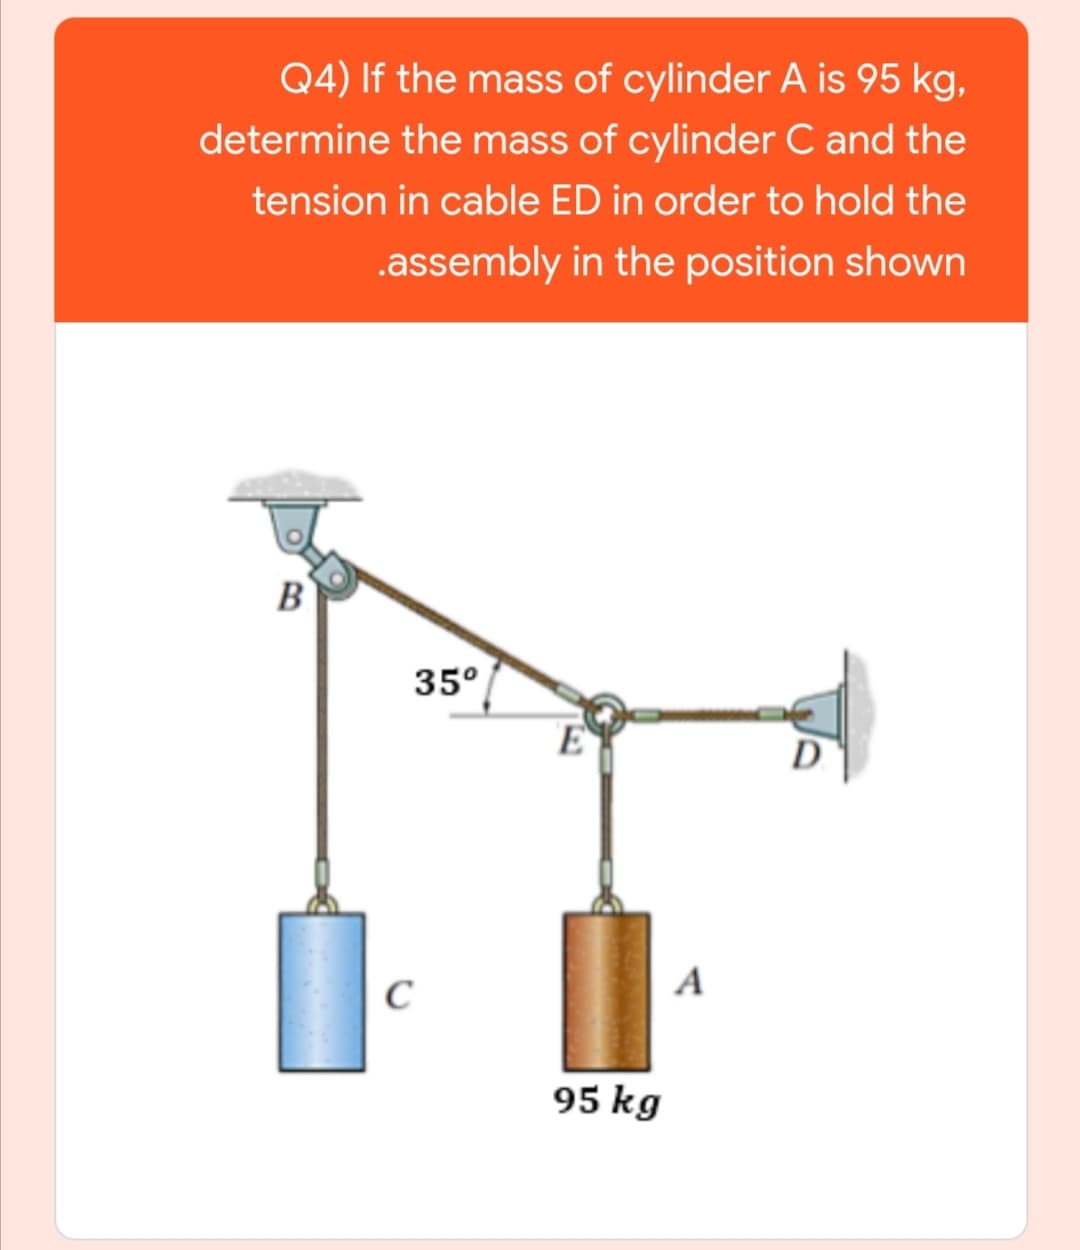 Q4) If the mass of cylinder A is 95 kg,
determine the mass of cylinder C and the
tension in cable ED in order to hold the
.assembly in the position shown
B
35°
D
C
A
95 kg
